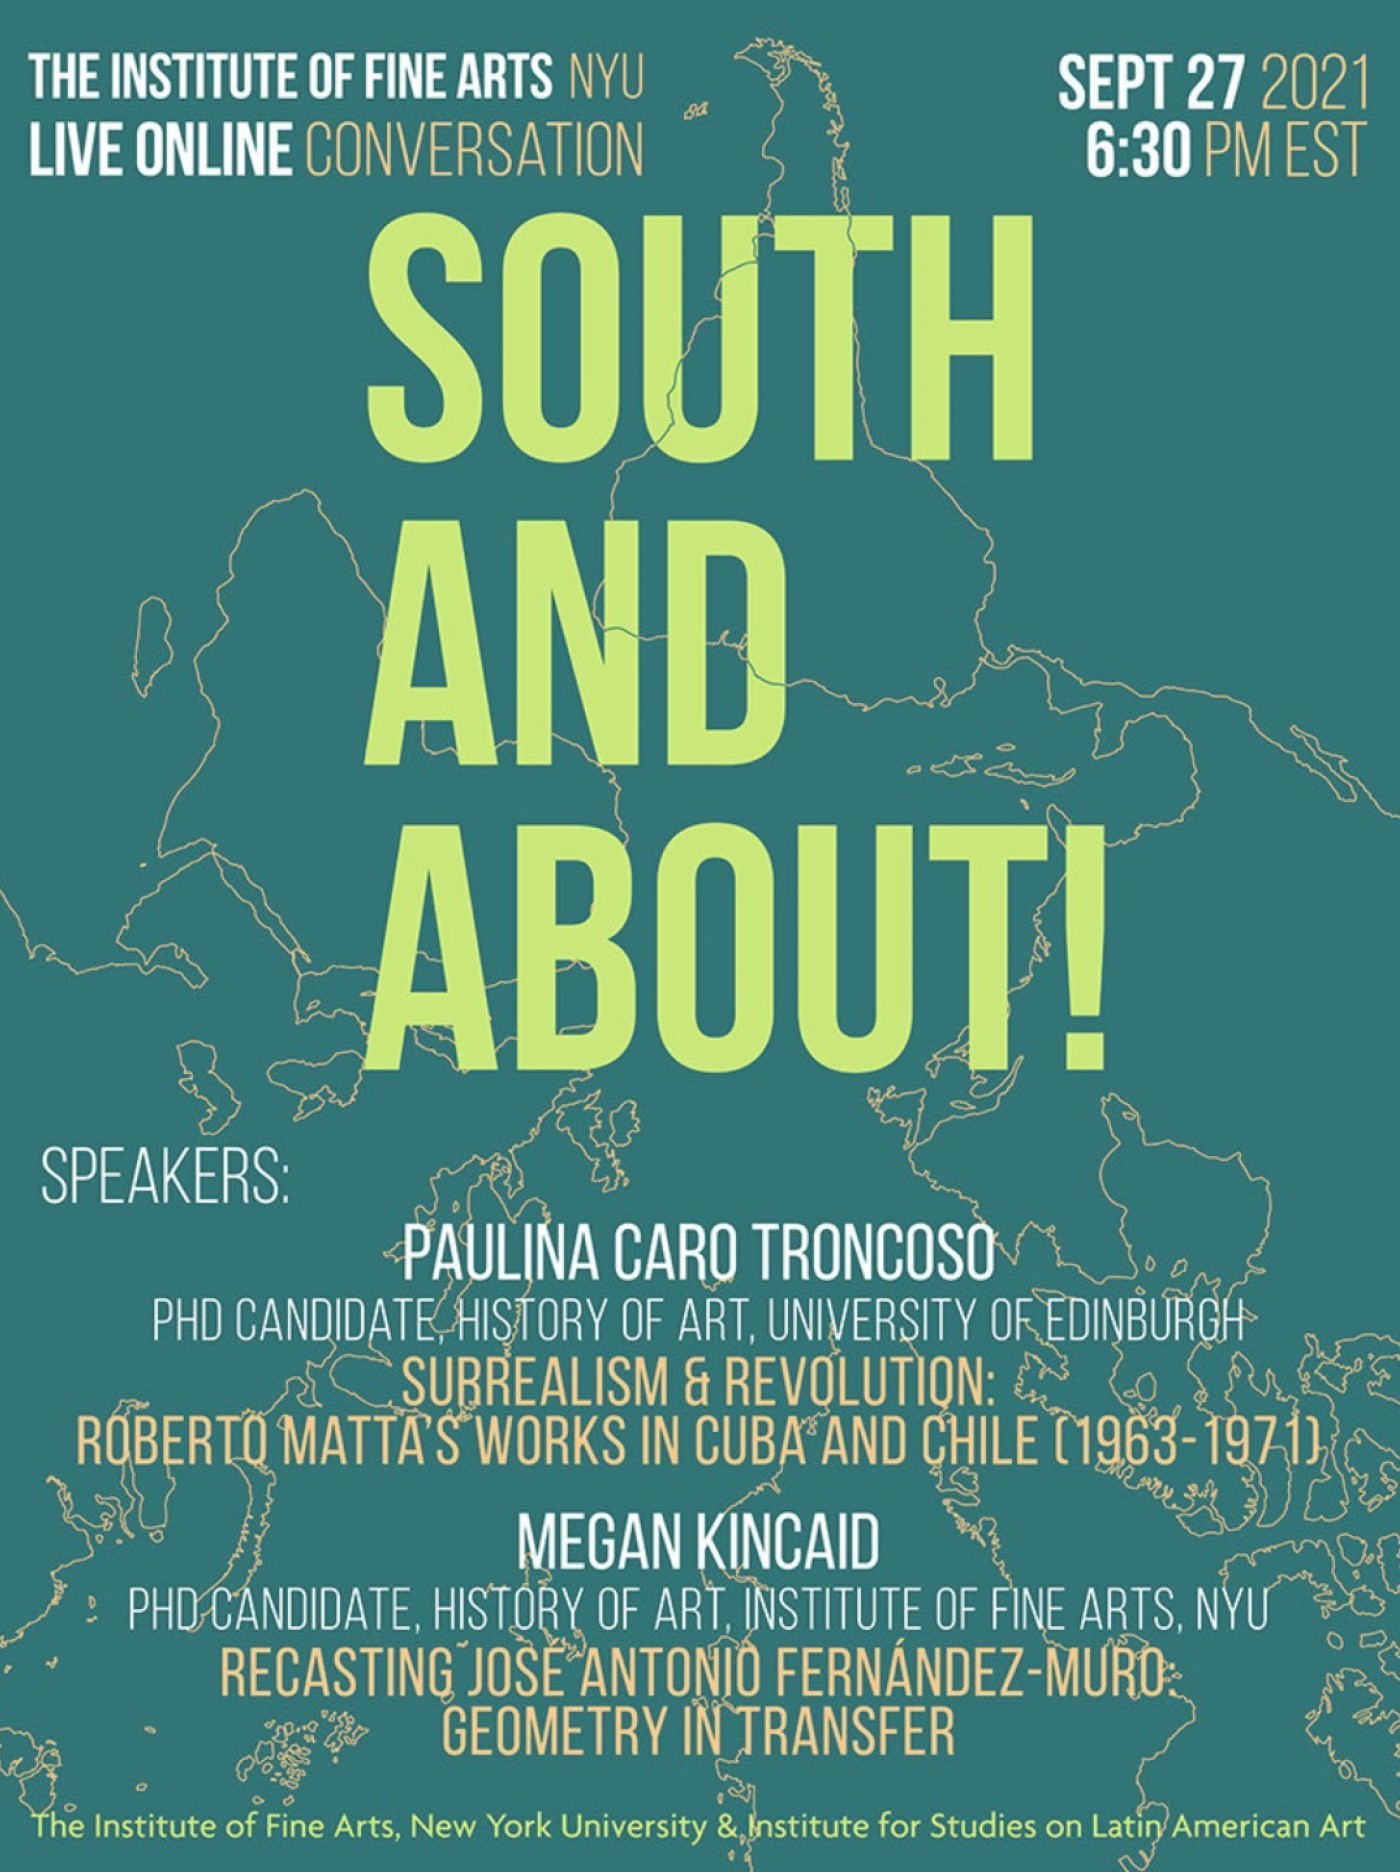 South and About event poster, Paulina Caro Troncoso and Megan Kincaid, September 27, 2021